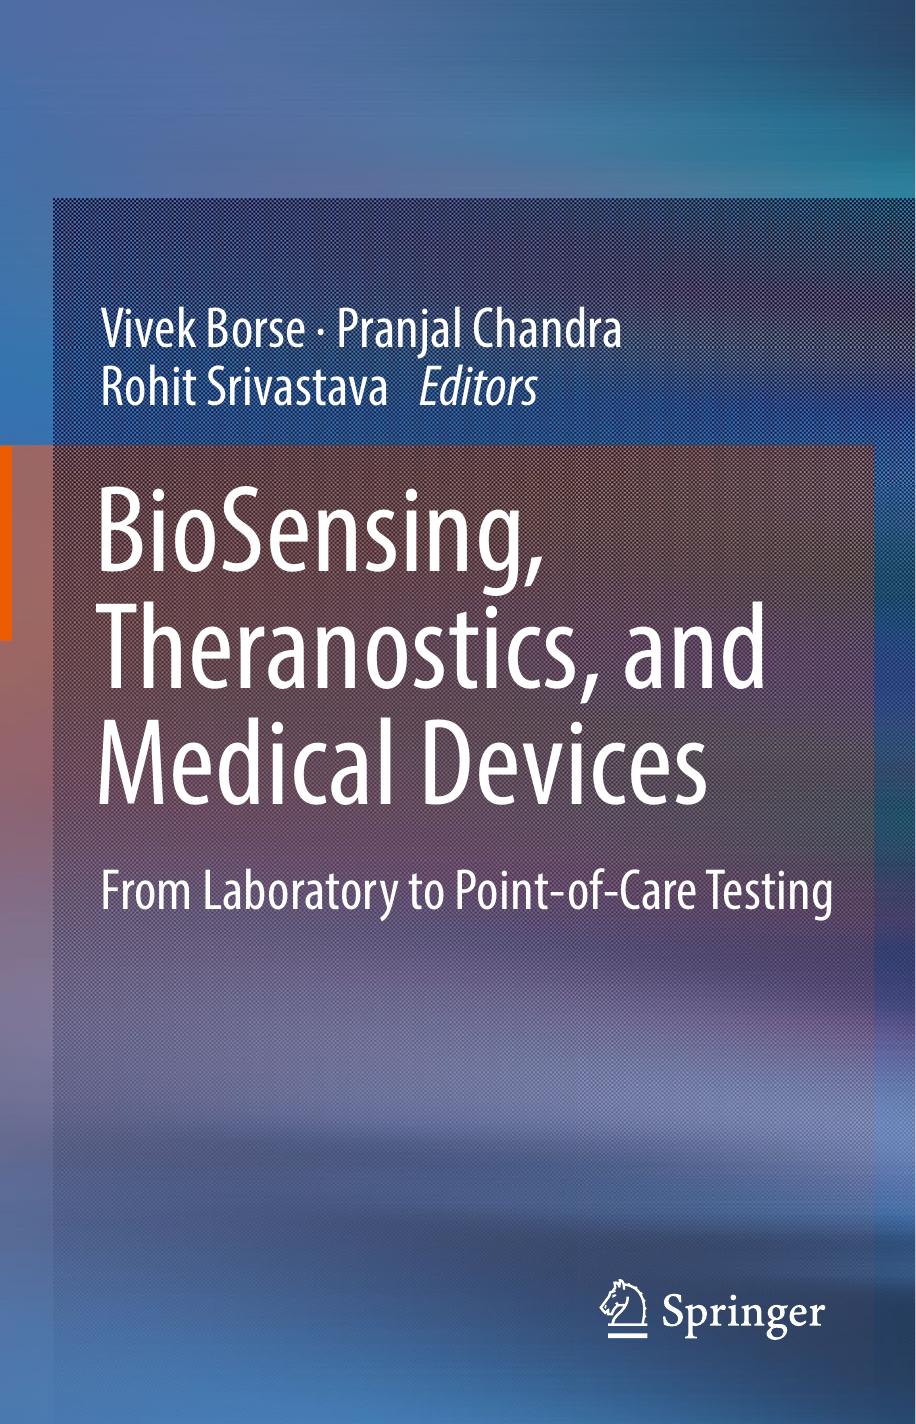 BioSensing, Theranostics, and Medical Devices  From Laboratory to Point-of-Care Testing (2021)